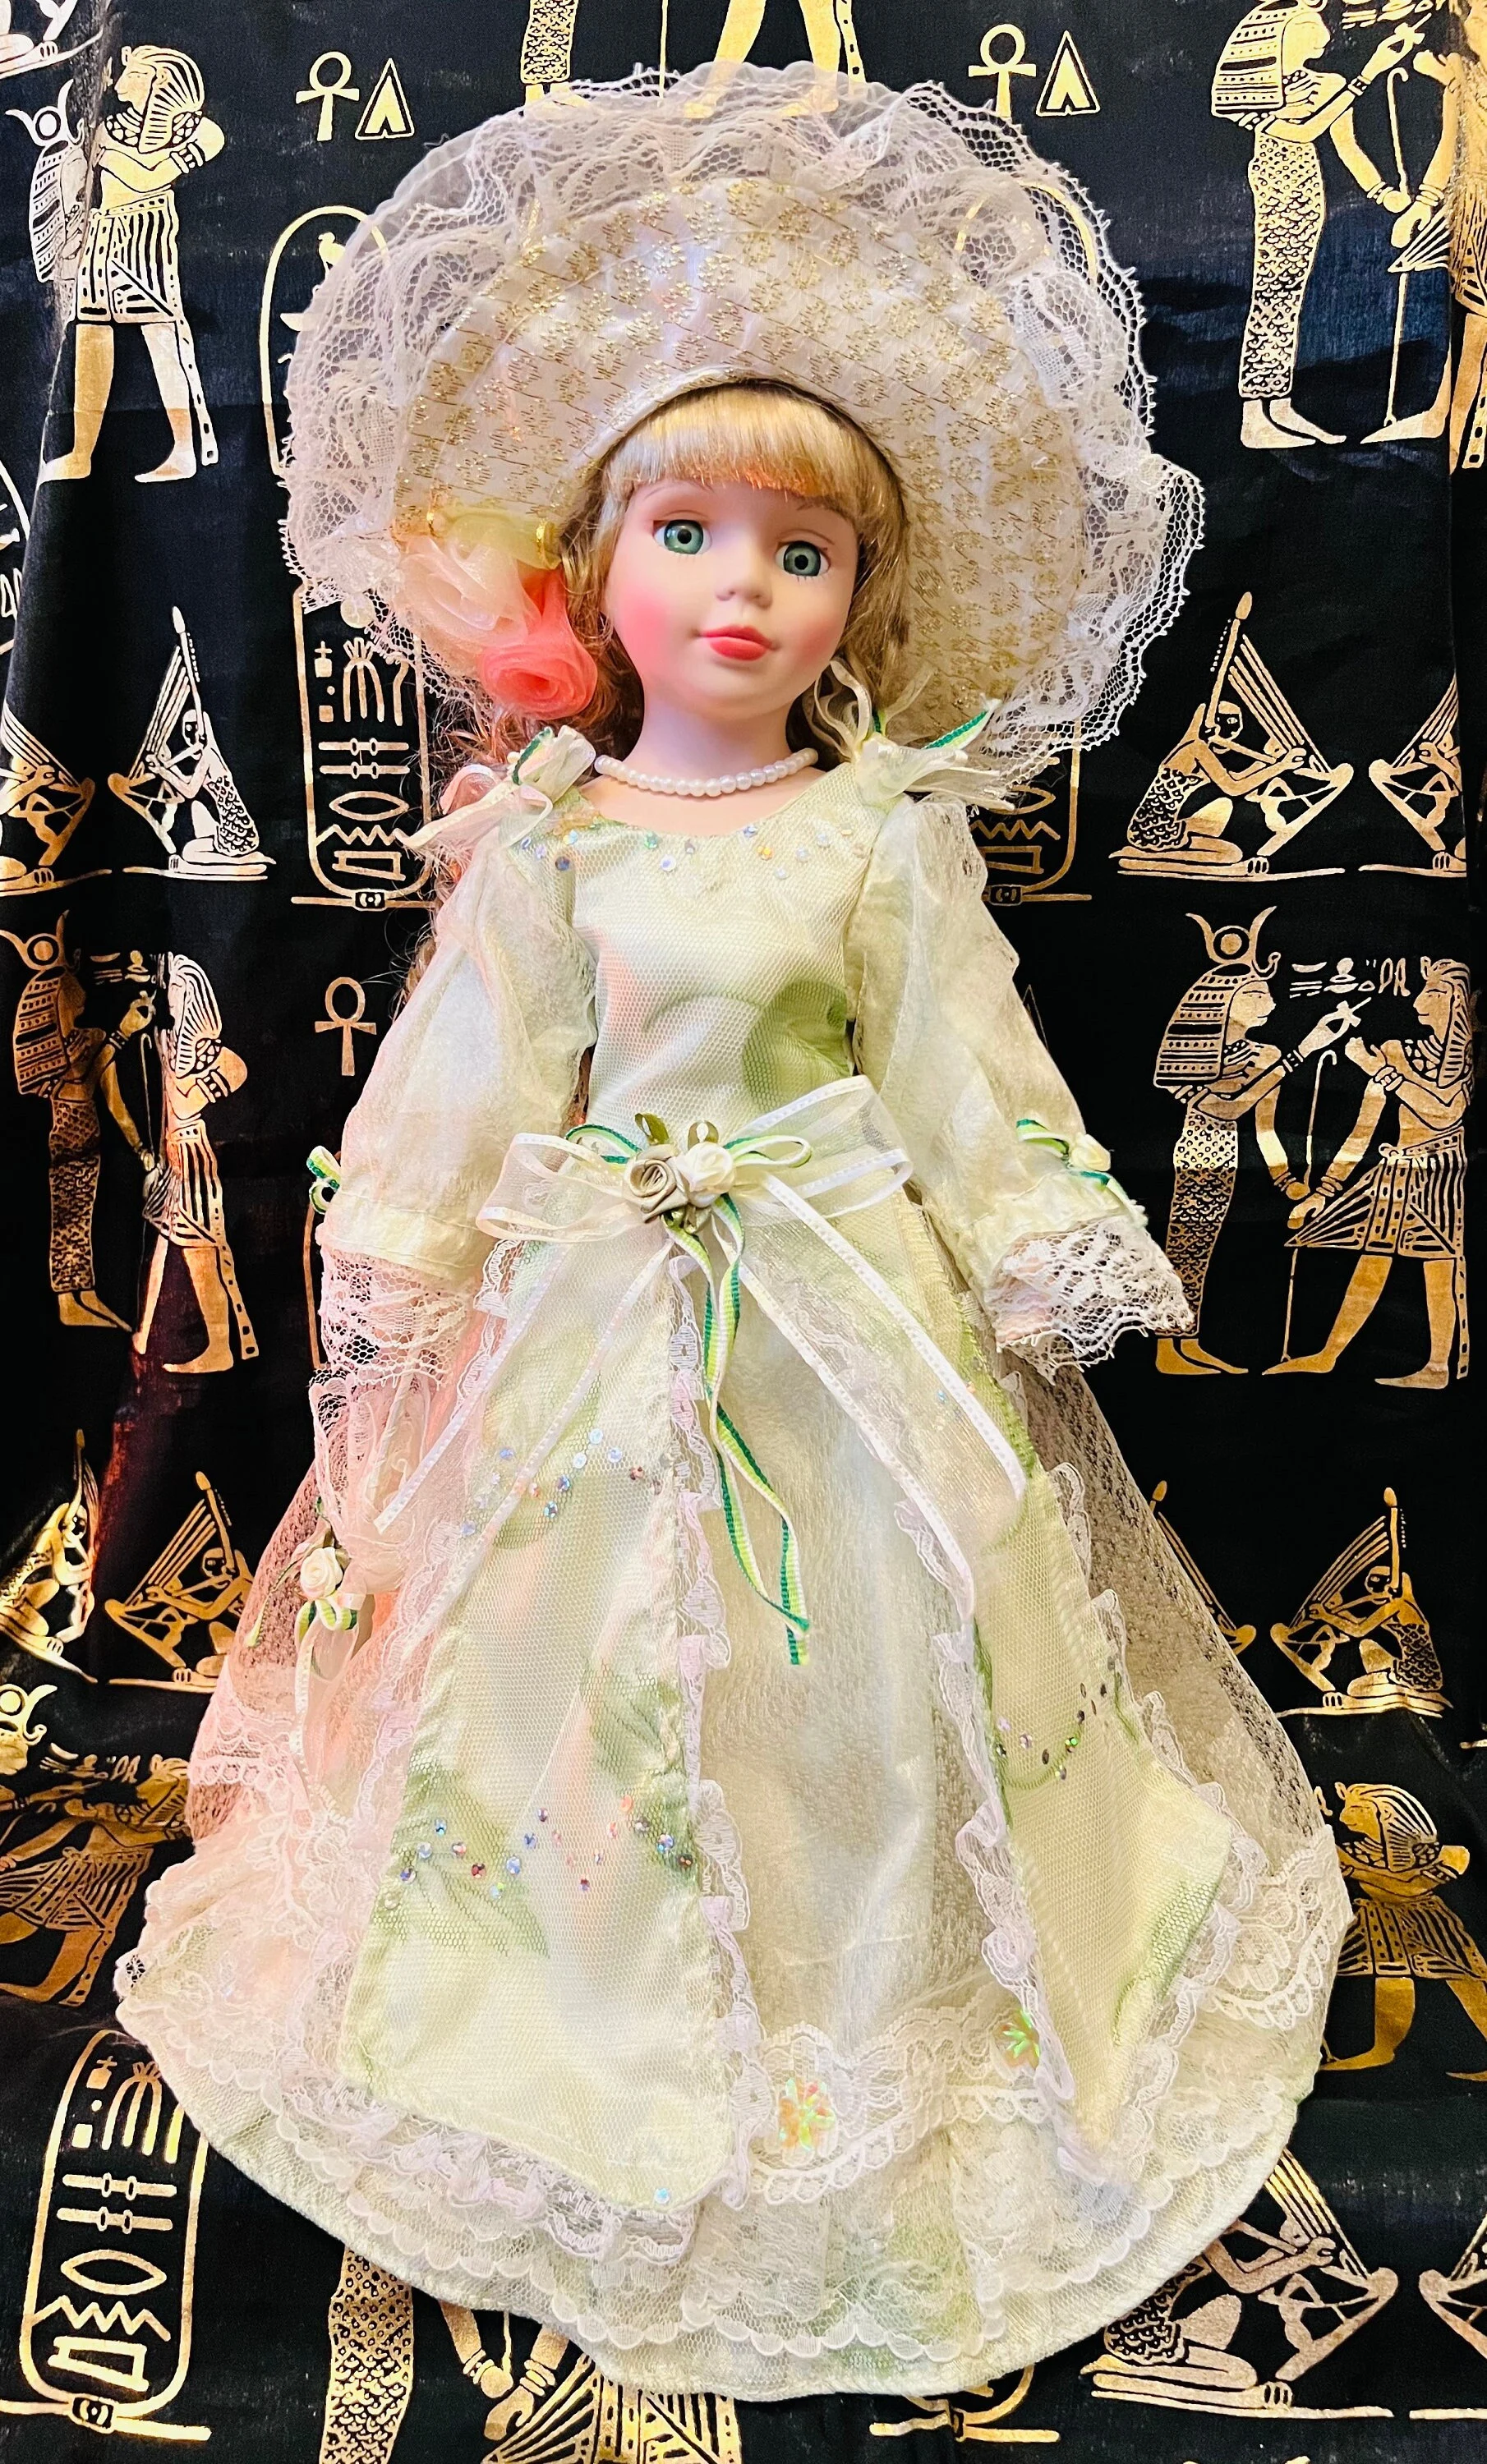 Haunted Vintage Porcelain Doll - Attached is a angelic spirit  - $284.36